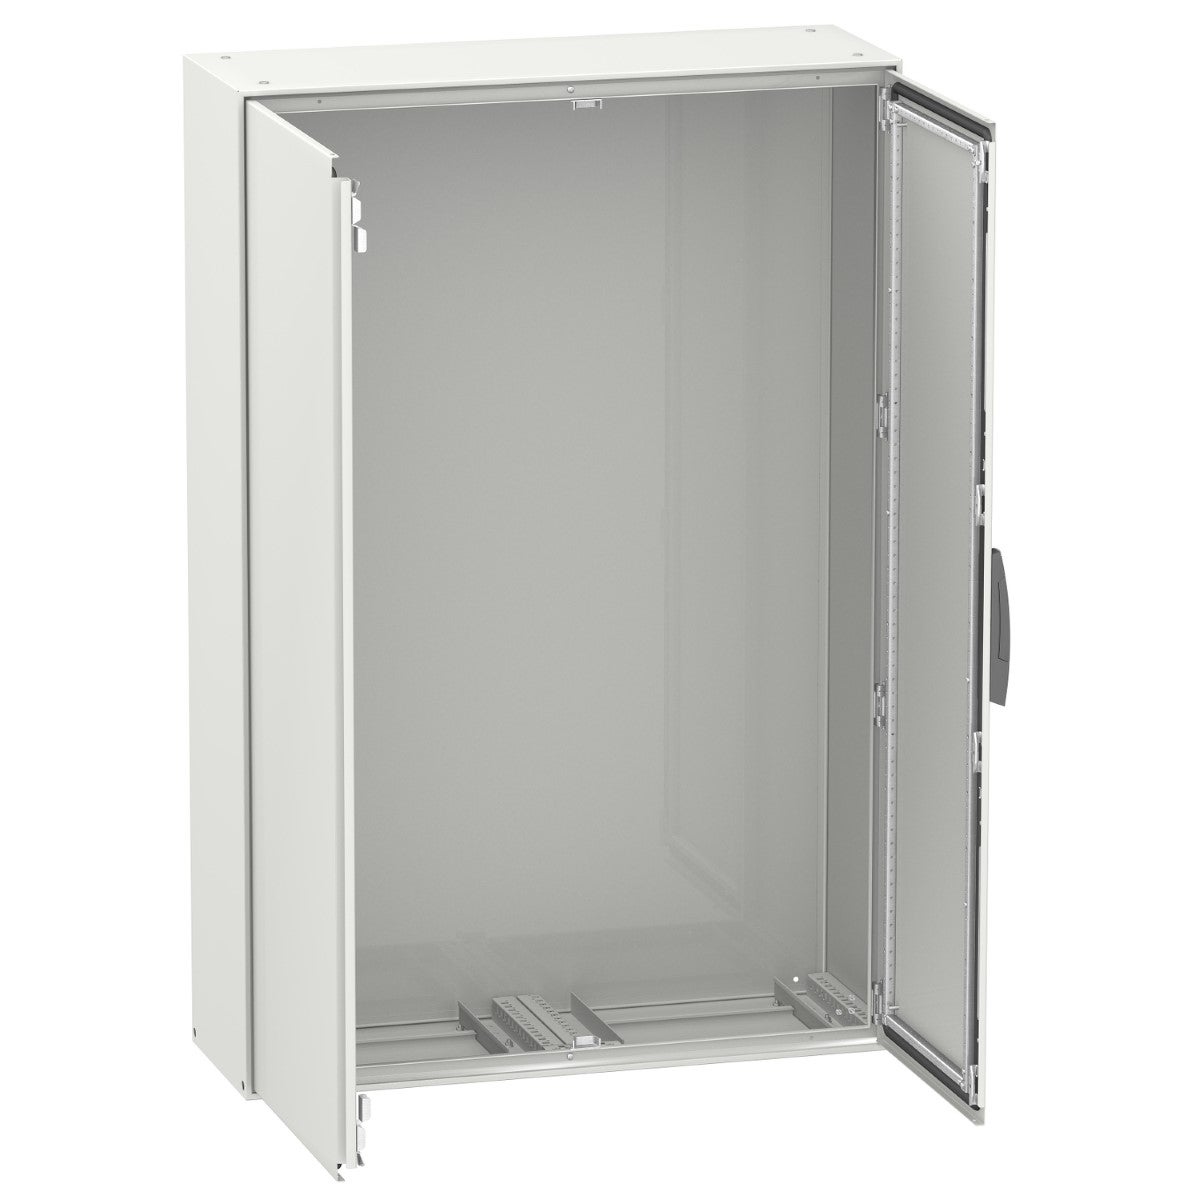 Spacial SM compact enclosure with mounting plate - 1800x1000x500 mm